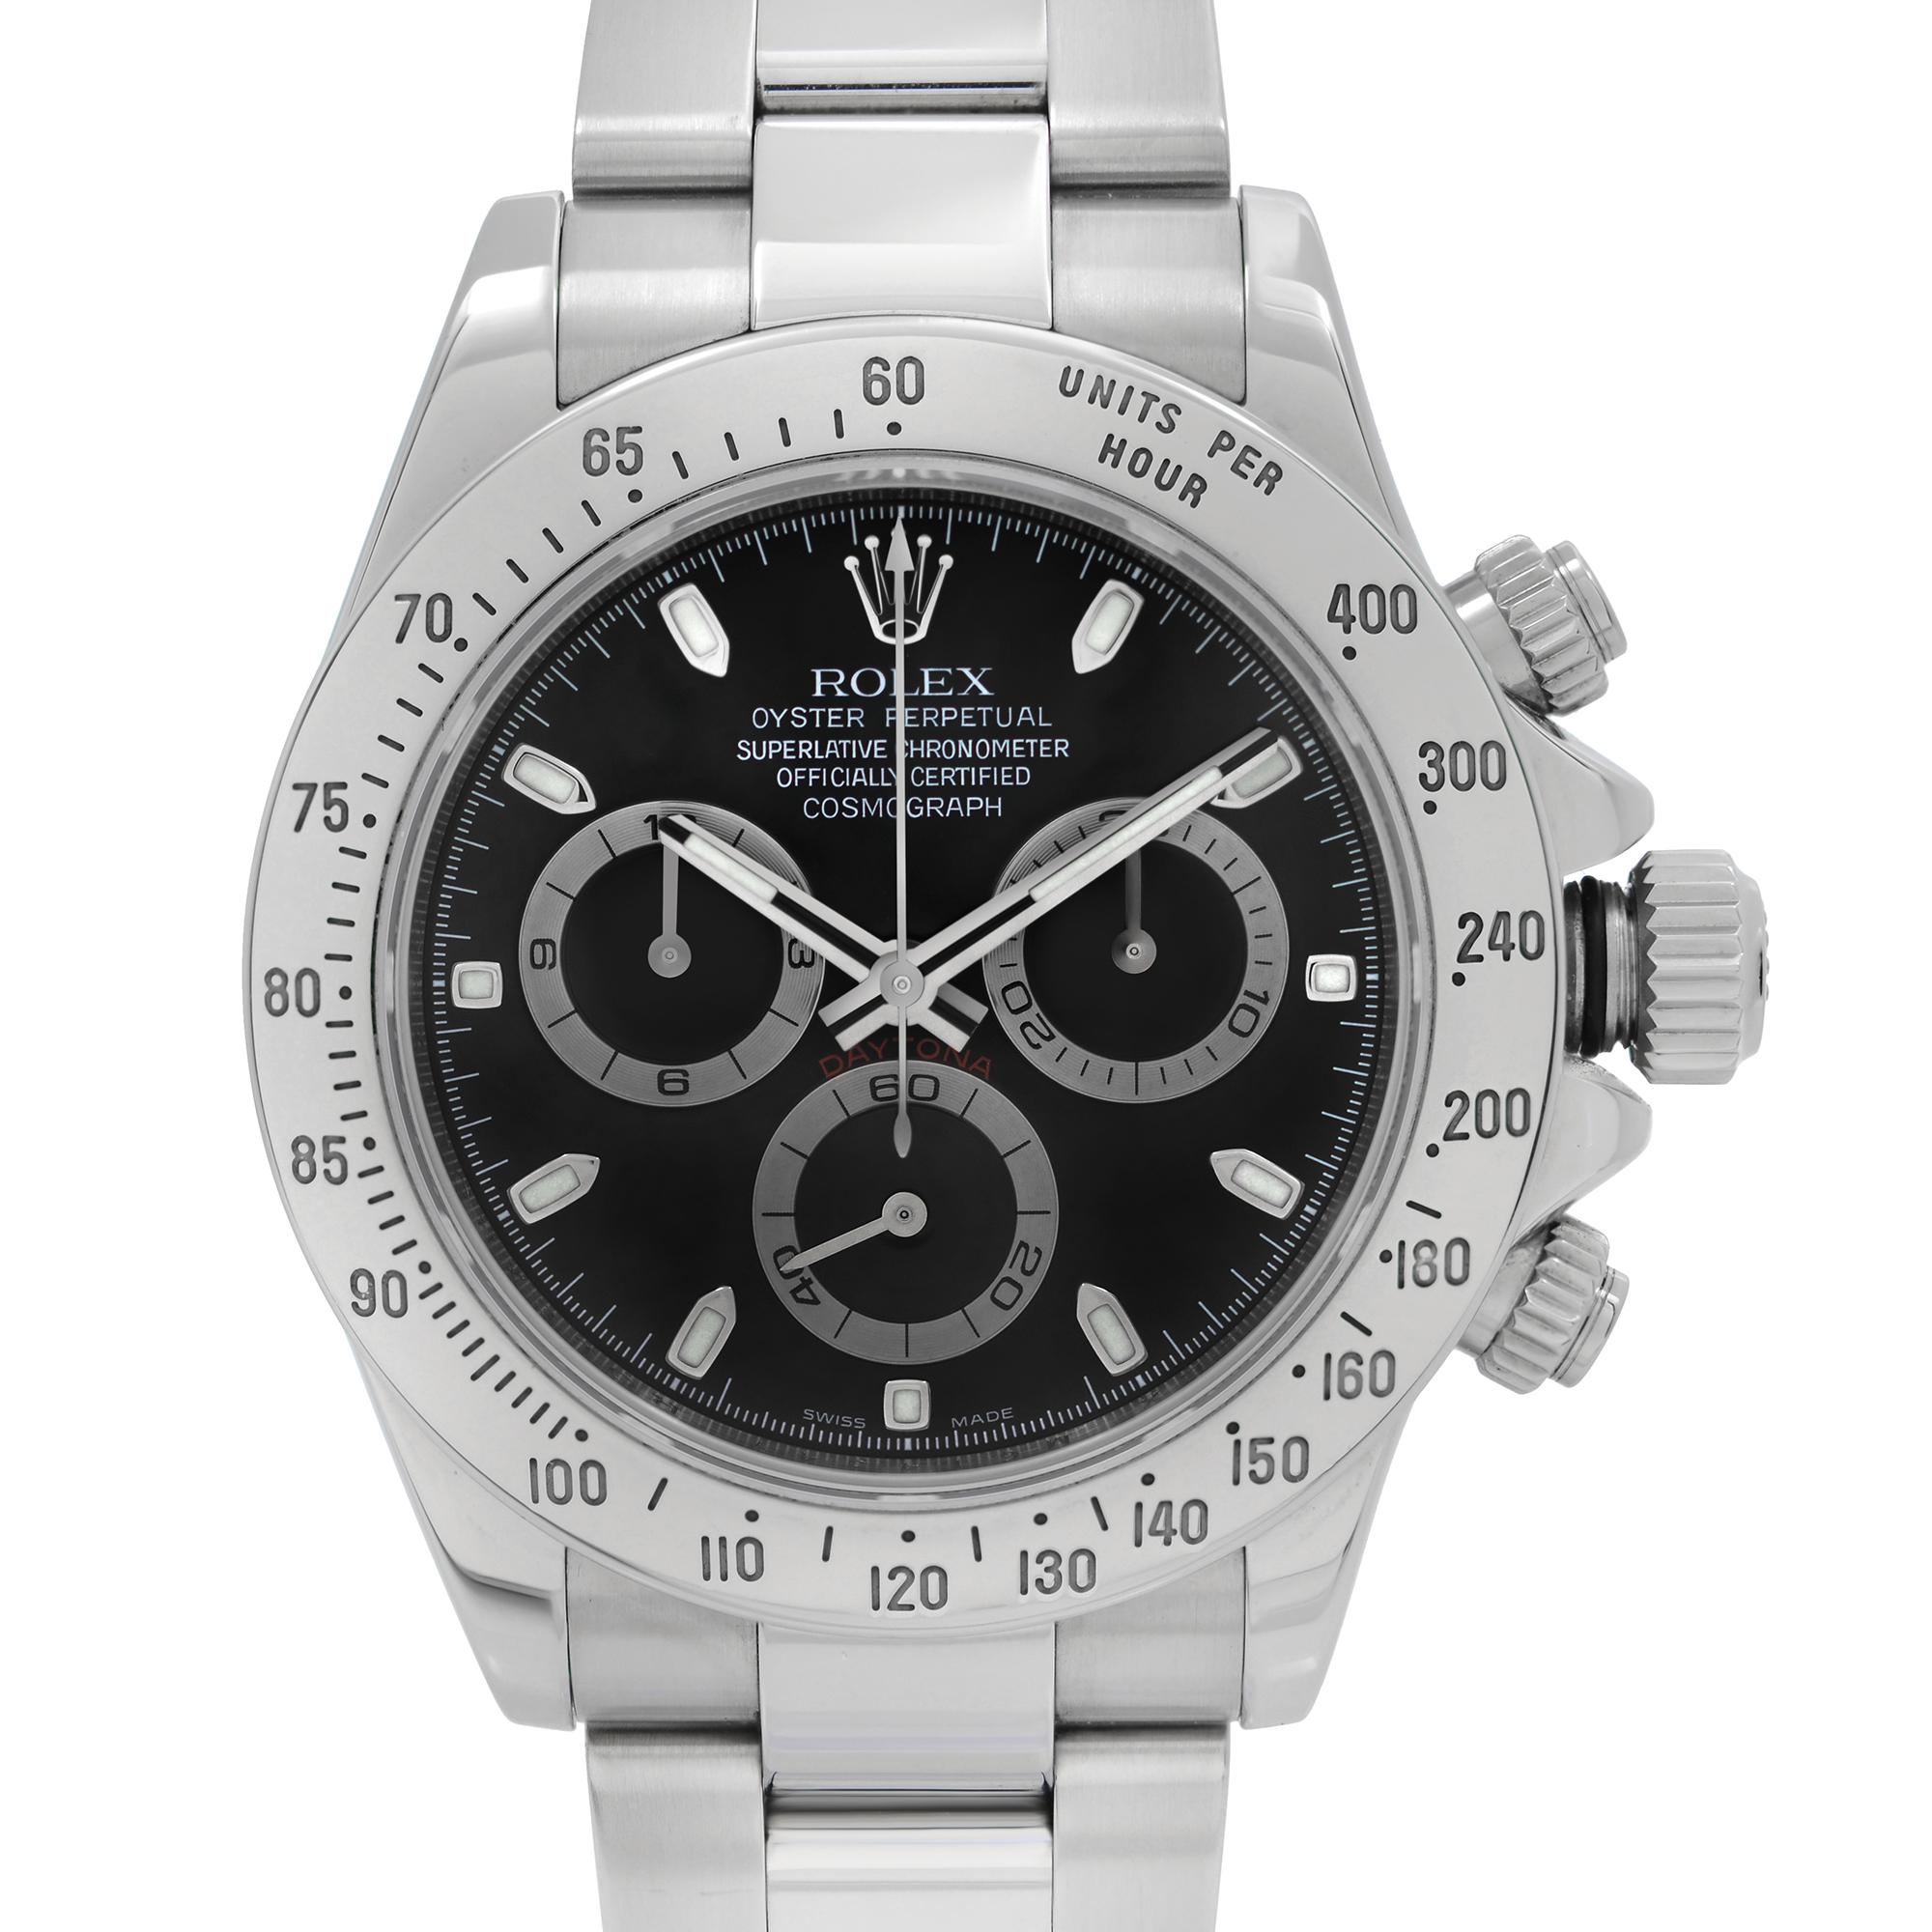 Pre-owned Rolex Daytona 40mm Chronograph Stainless Steel Black Dial Automatic Men's Watch 116520. The Watch is powered by an Automatic Movement and Features: Polished Steel Round Case and Oyster Bracelet. Fixed Steel Bezel with Tachymetric Scale